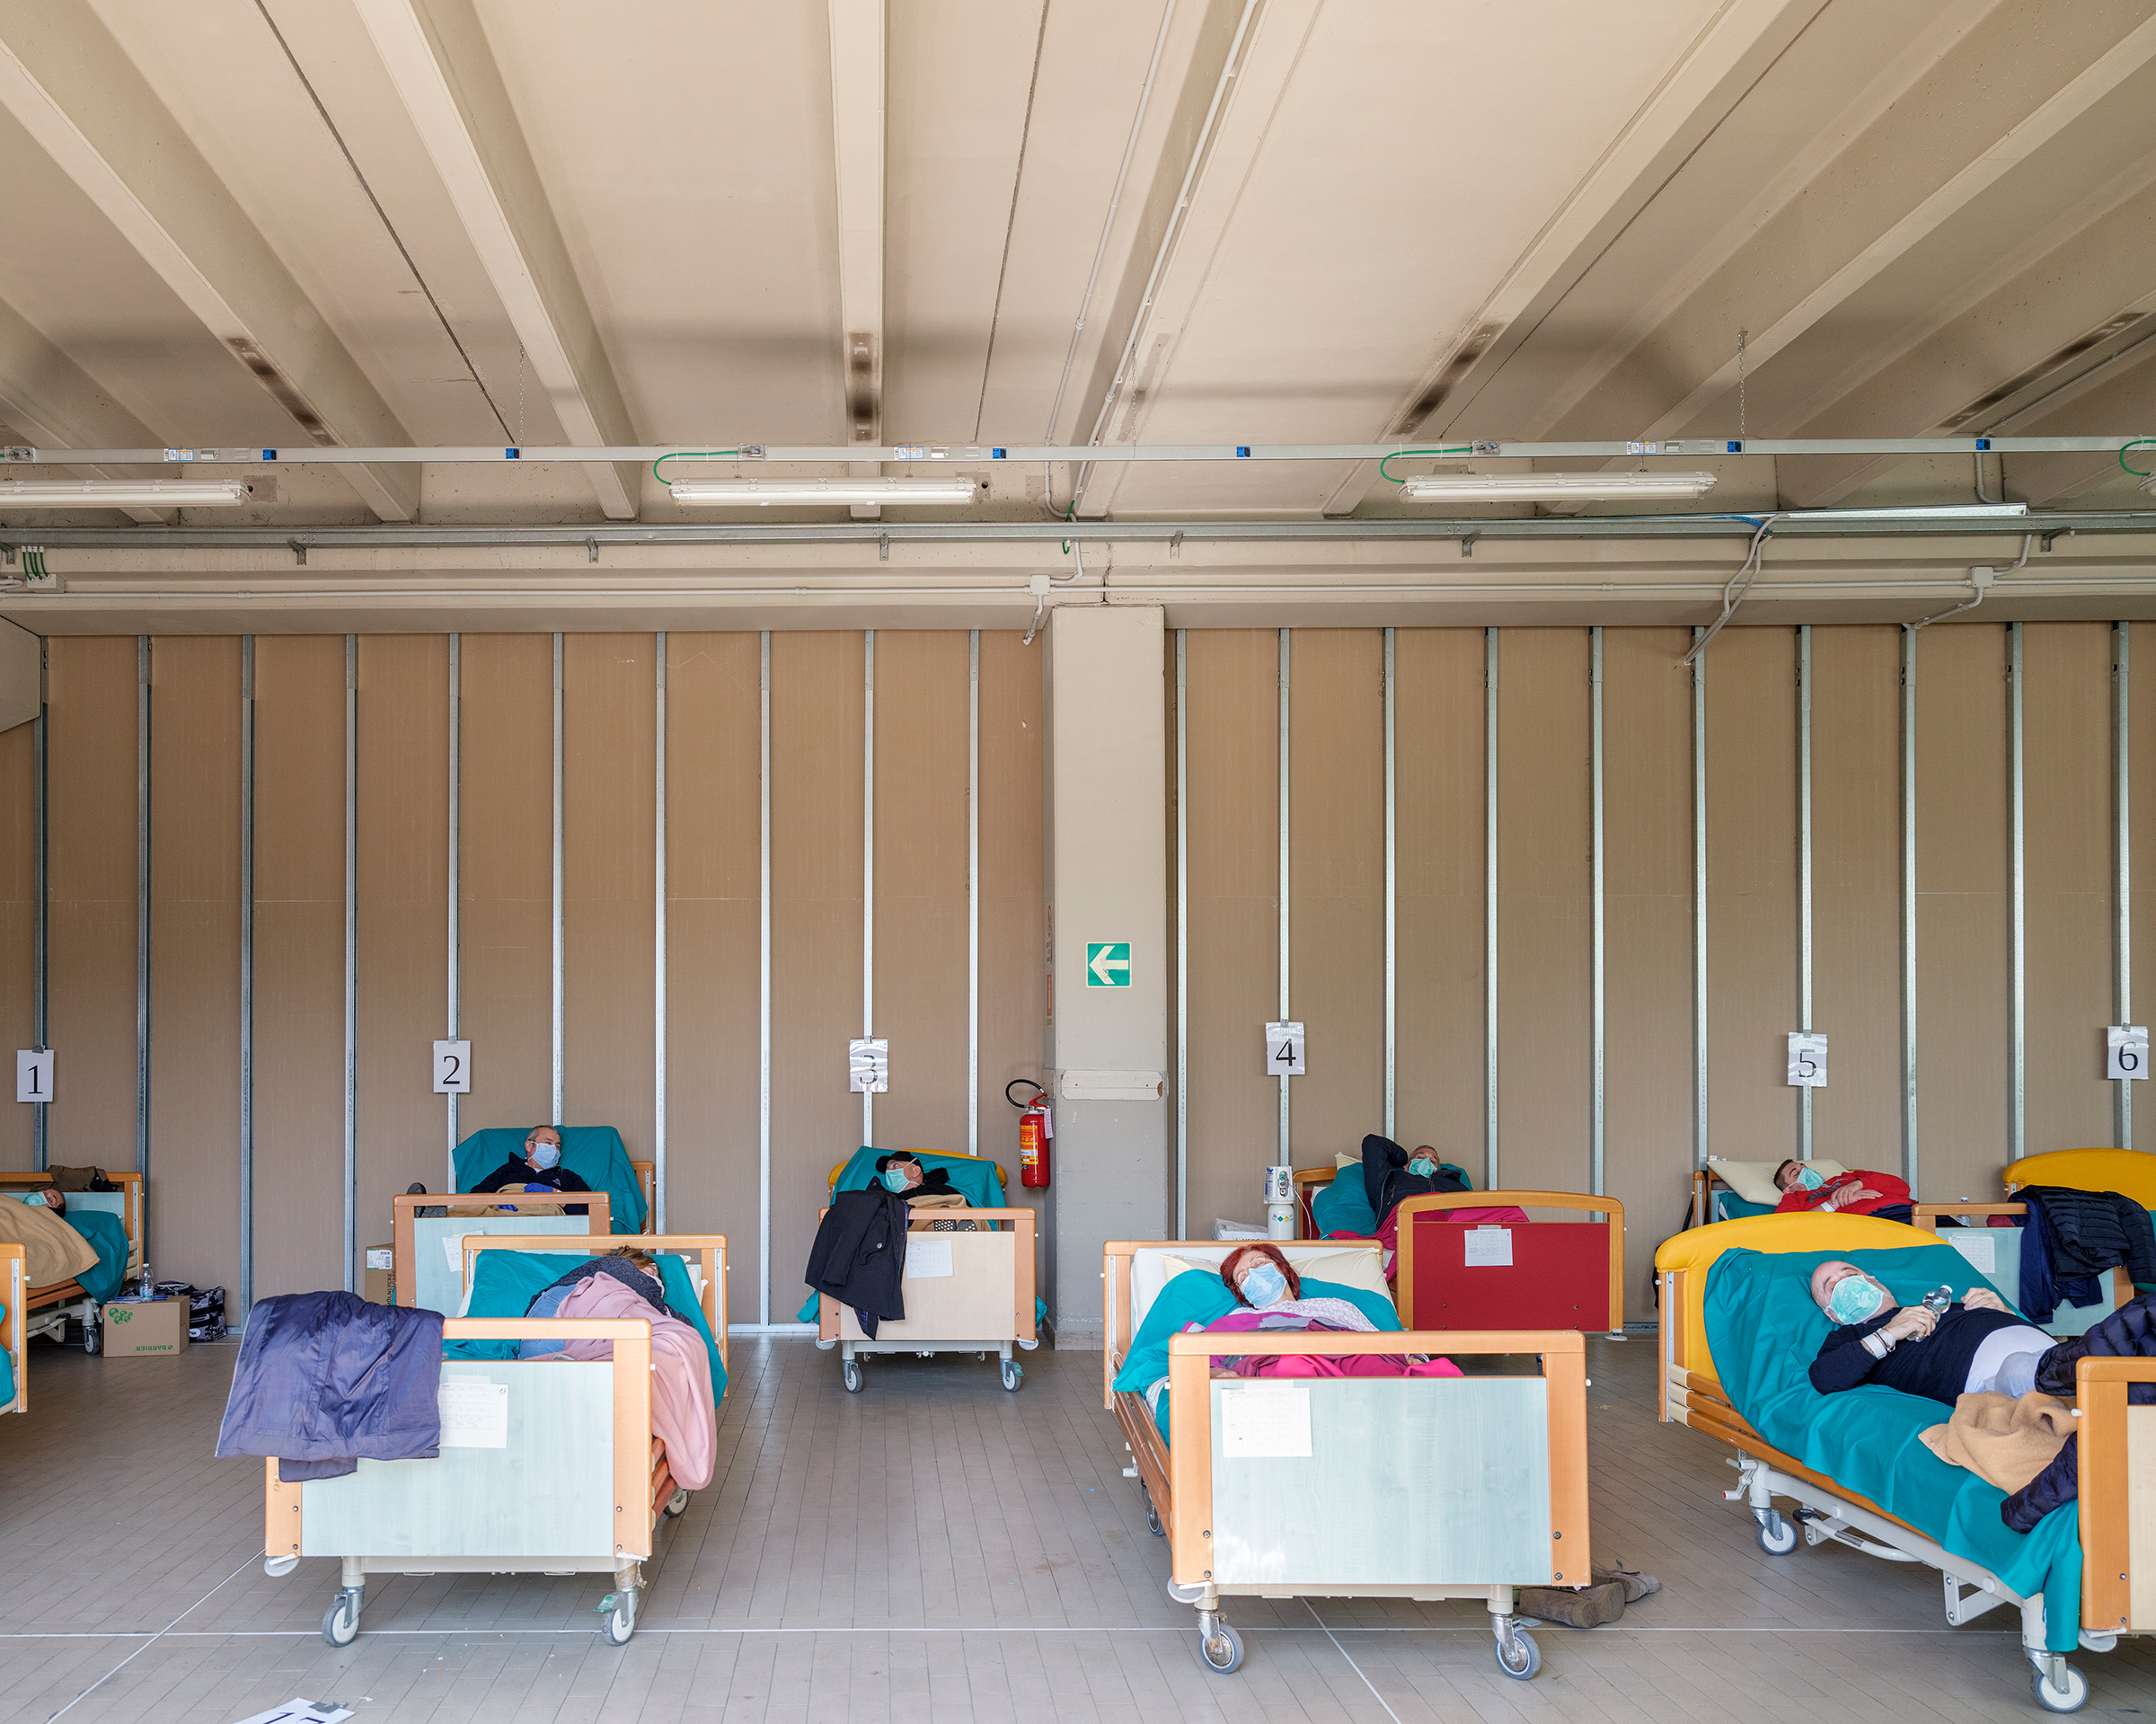 Beds in a COVID-19 unit are filled at a hospital in Brescia. (Lorenzo Meloni—Magnum Photos for TIME)